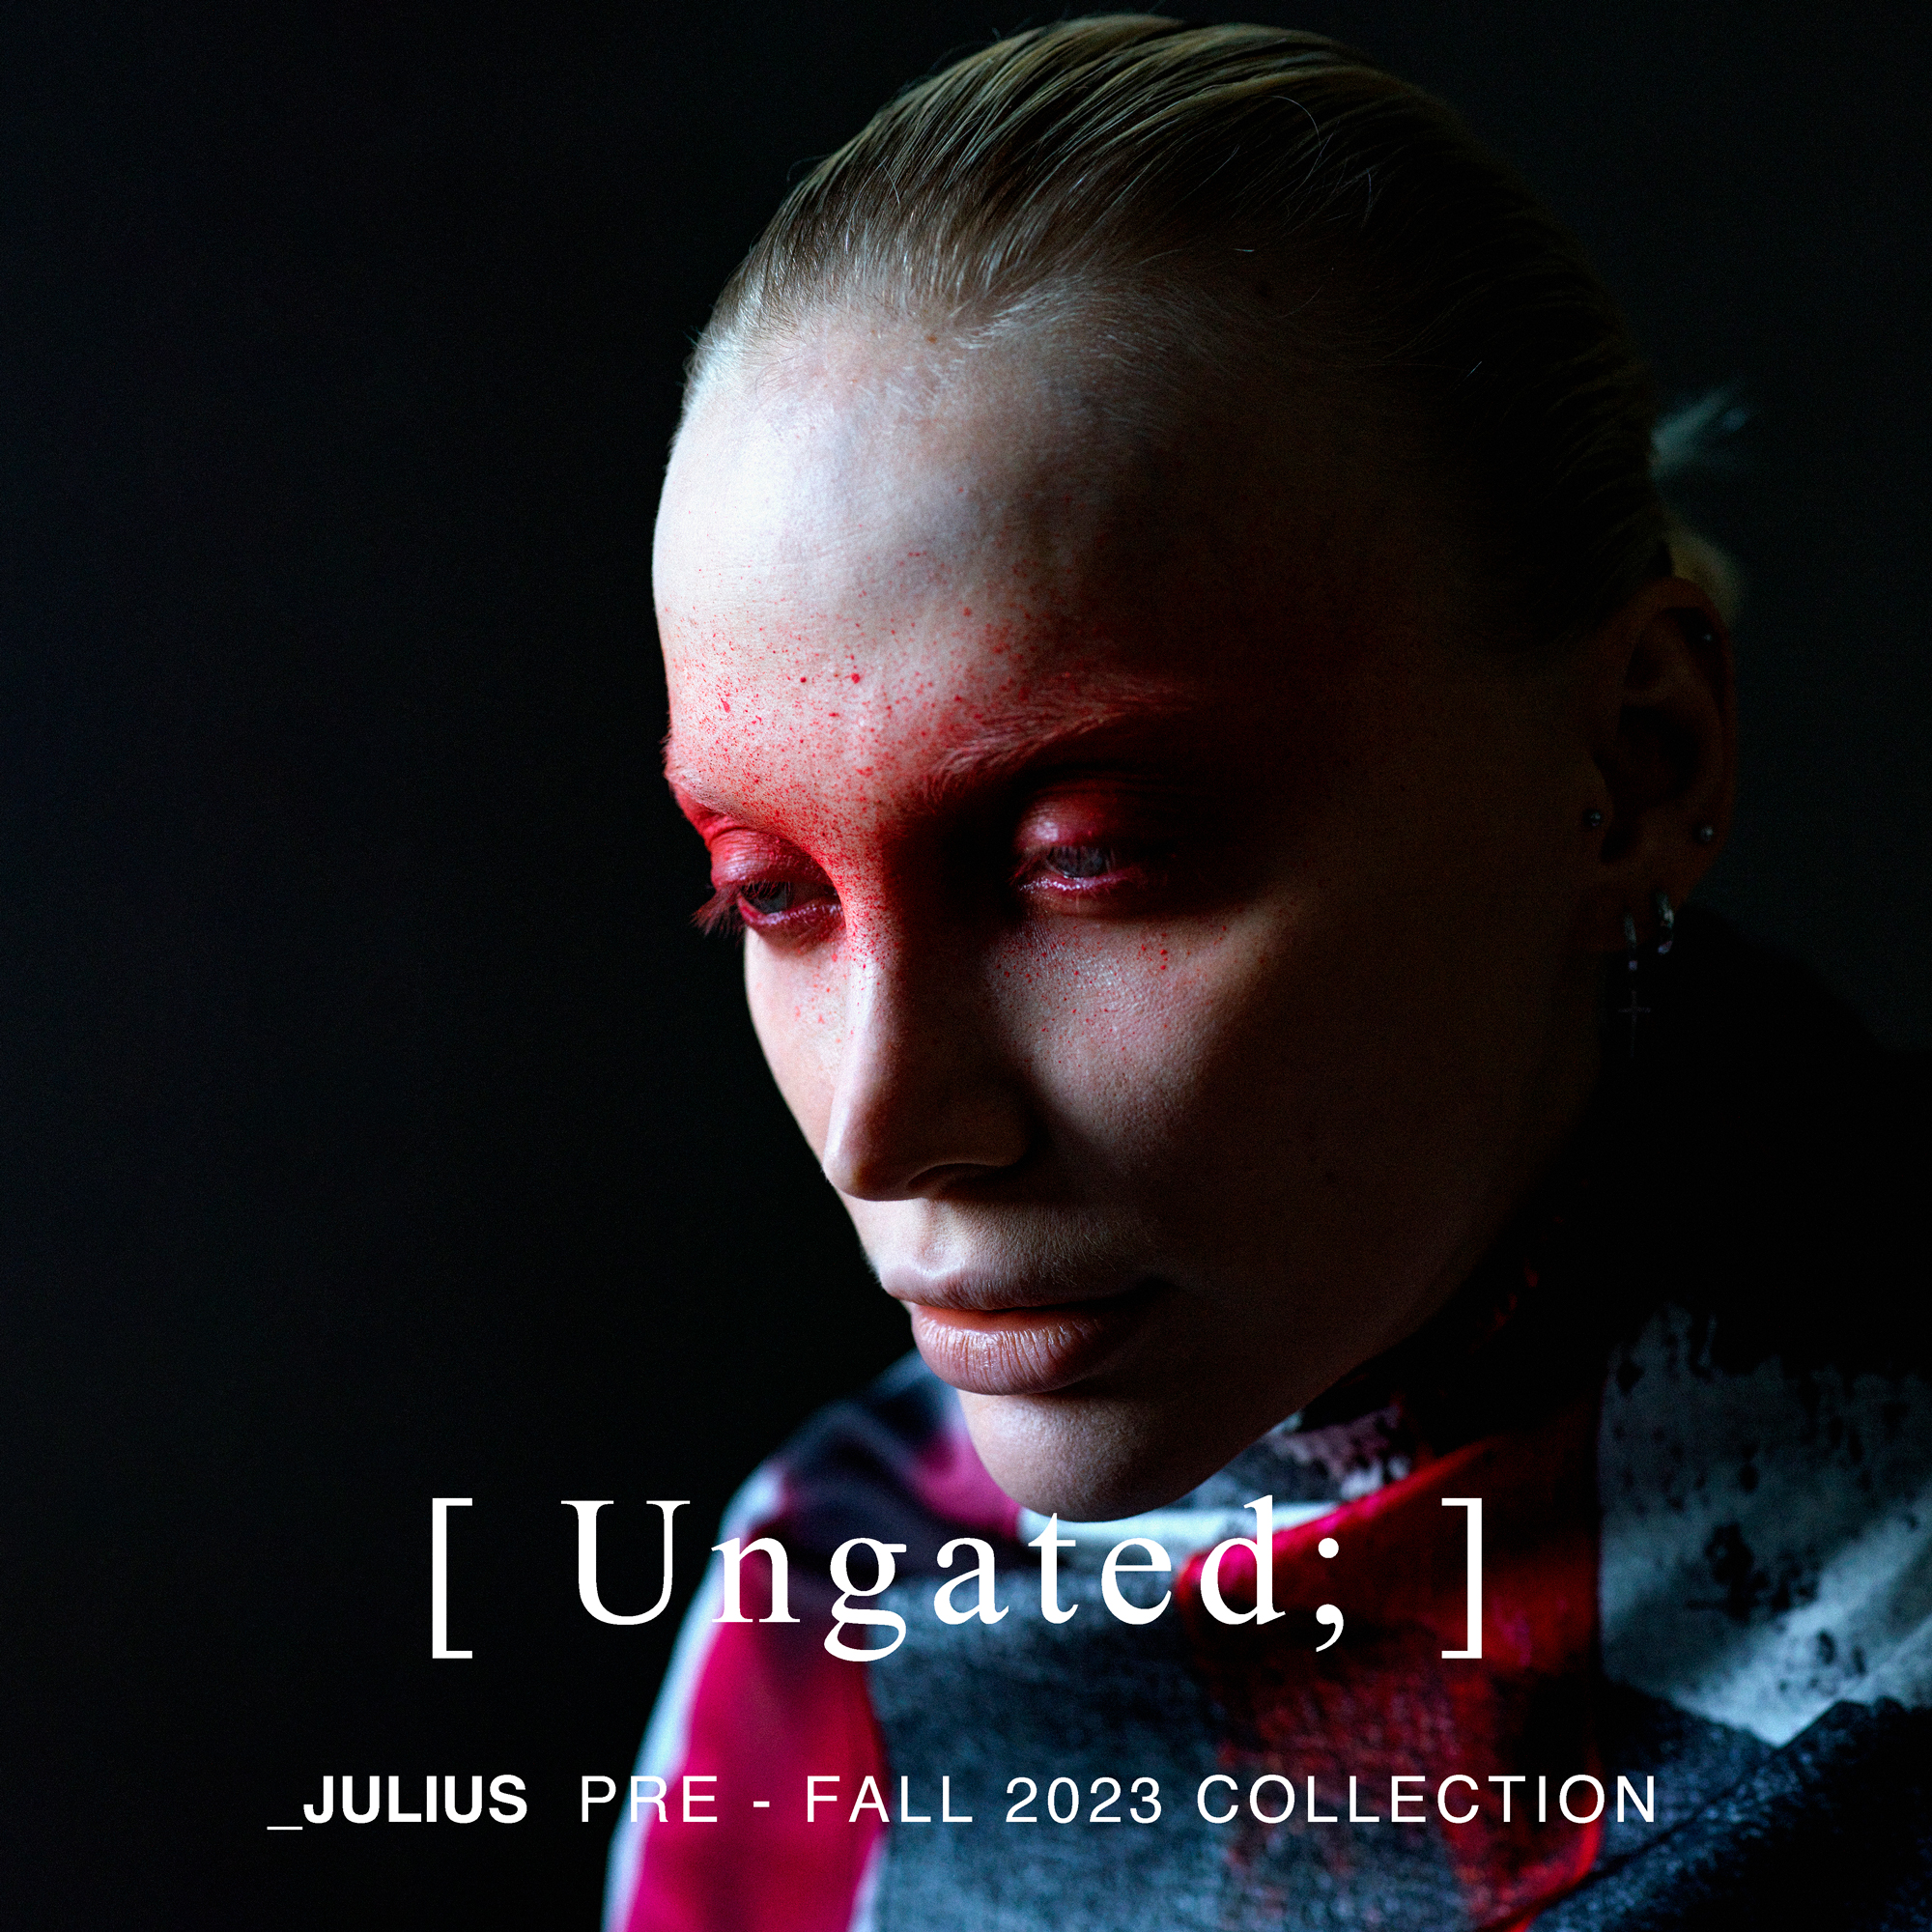 _JULIUS PRE-FALL 2023 COLLECTION [ Ungated; ]